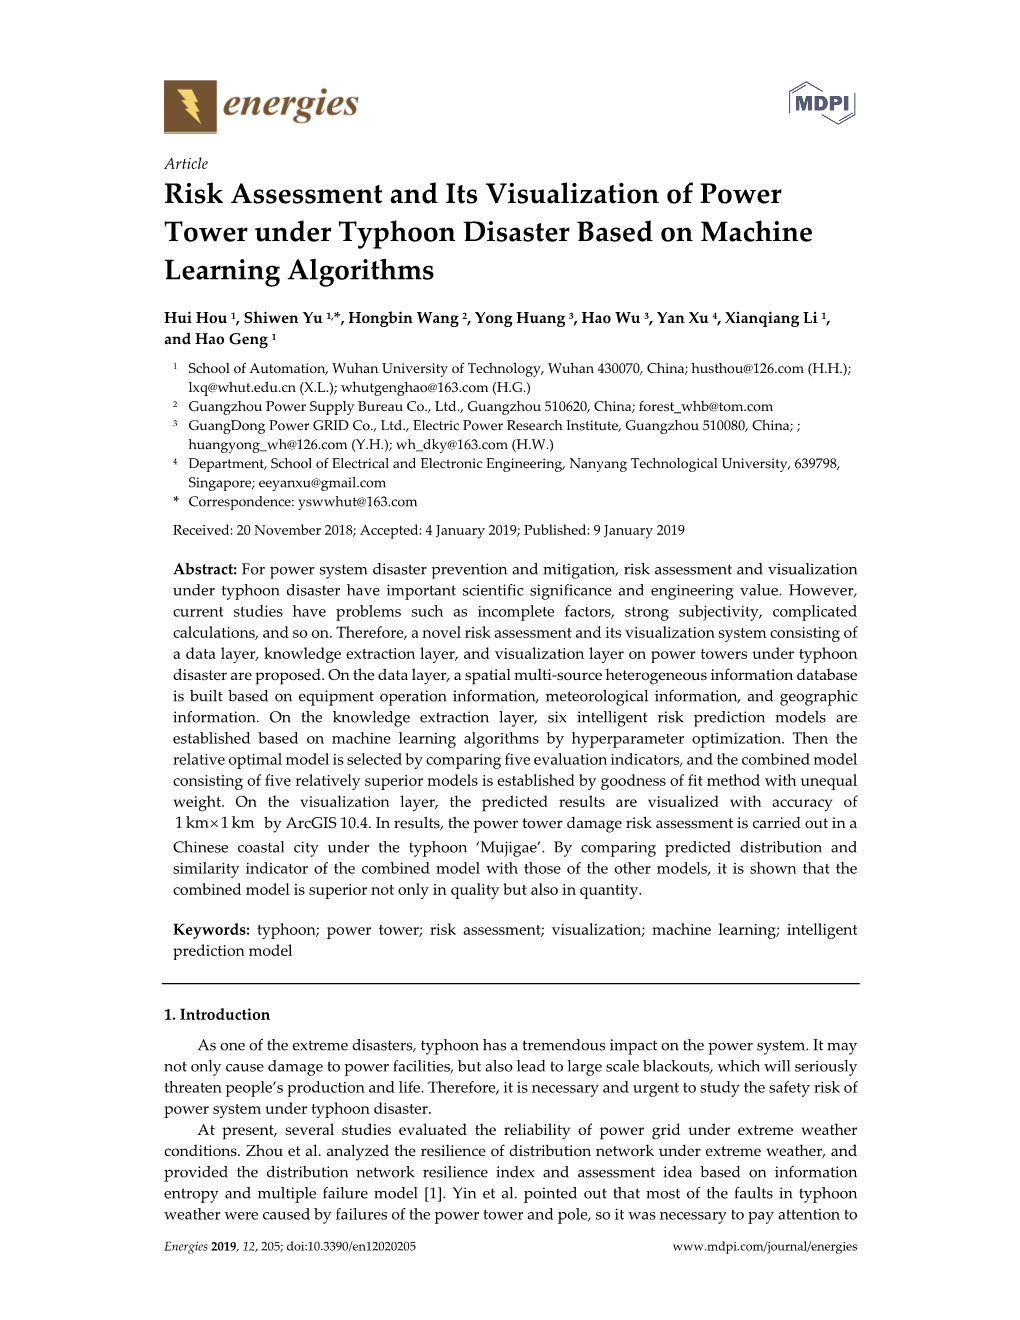 Risk Assessment and Its Visualization of Power Tower Under Typhoon Disaster Based on Machine Learning Algorithms